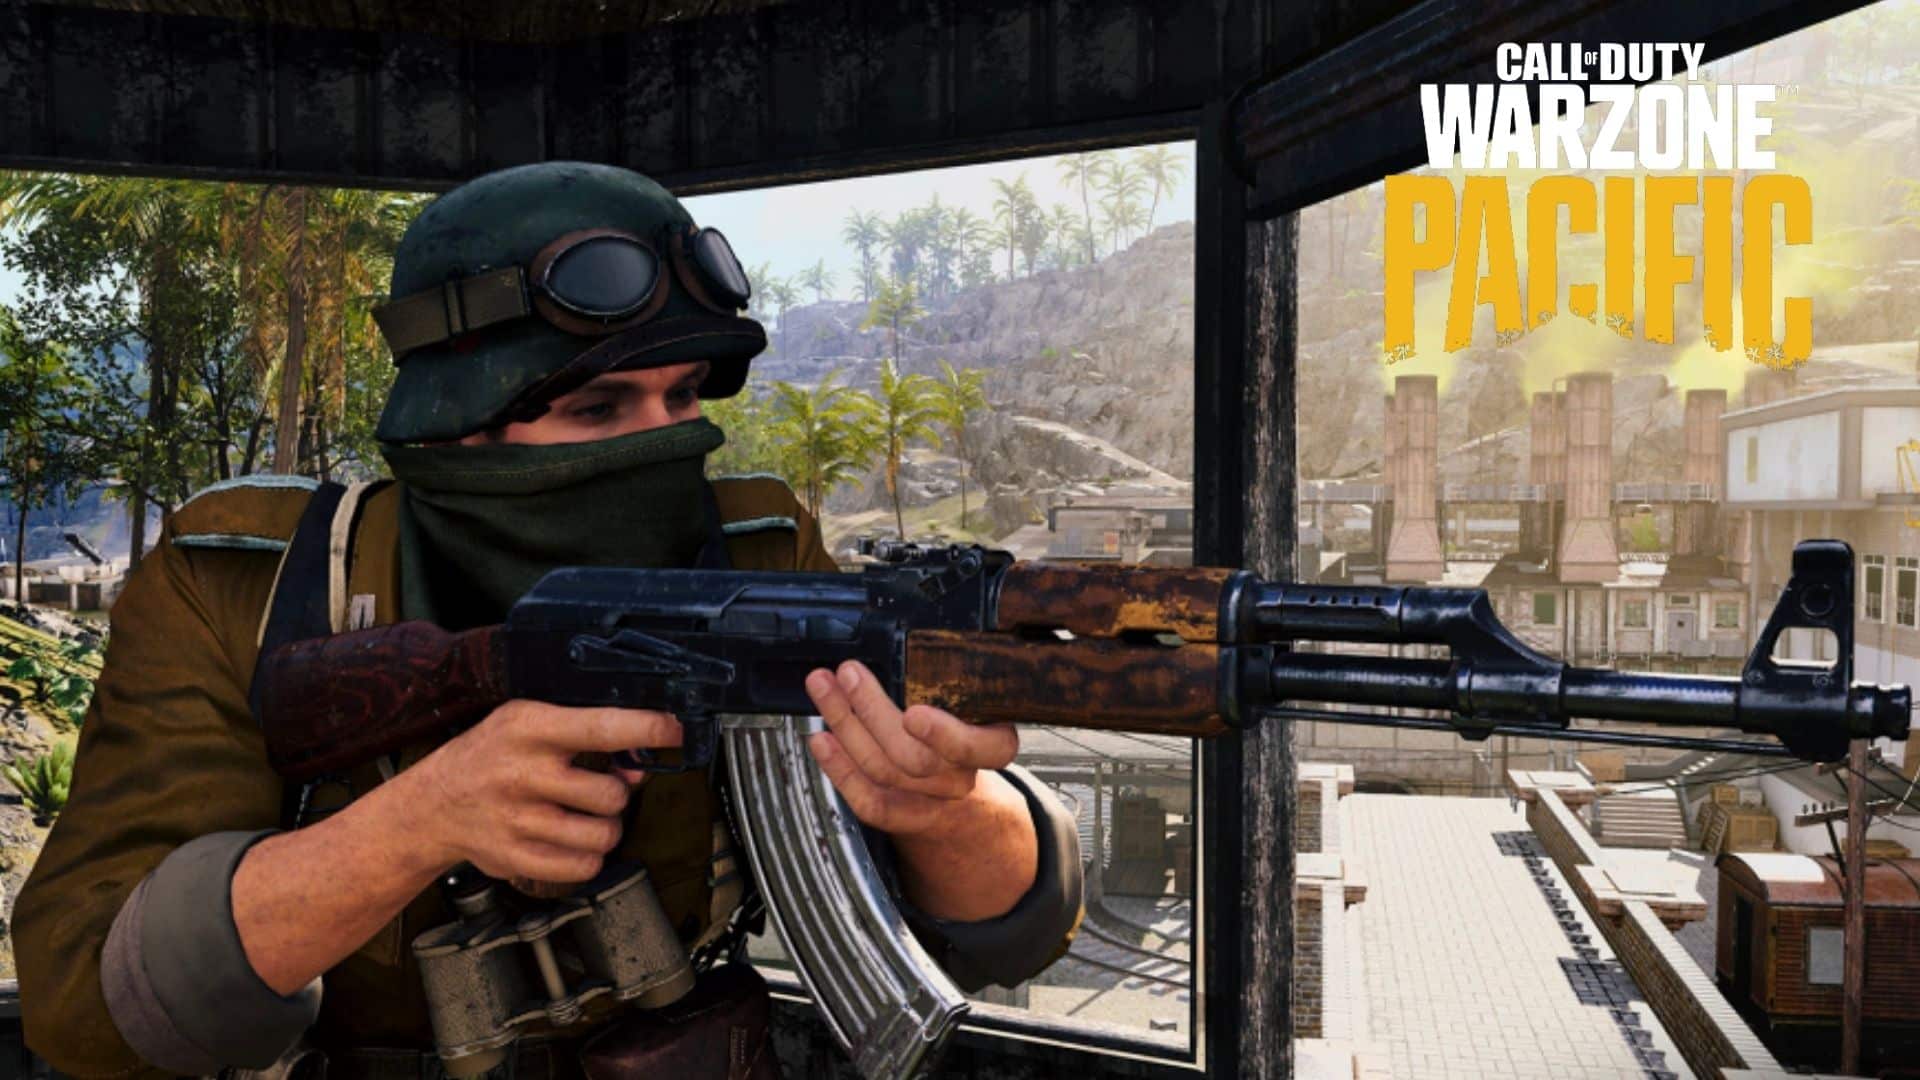 Warzone character holding AK47 with Pacific logo